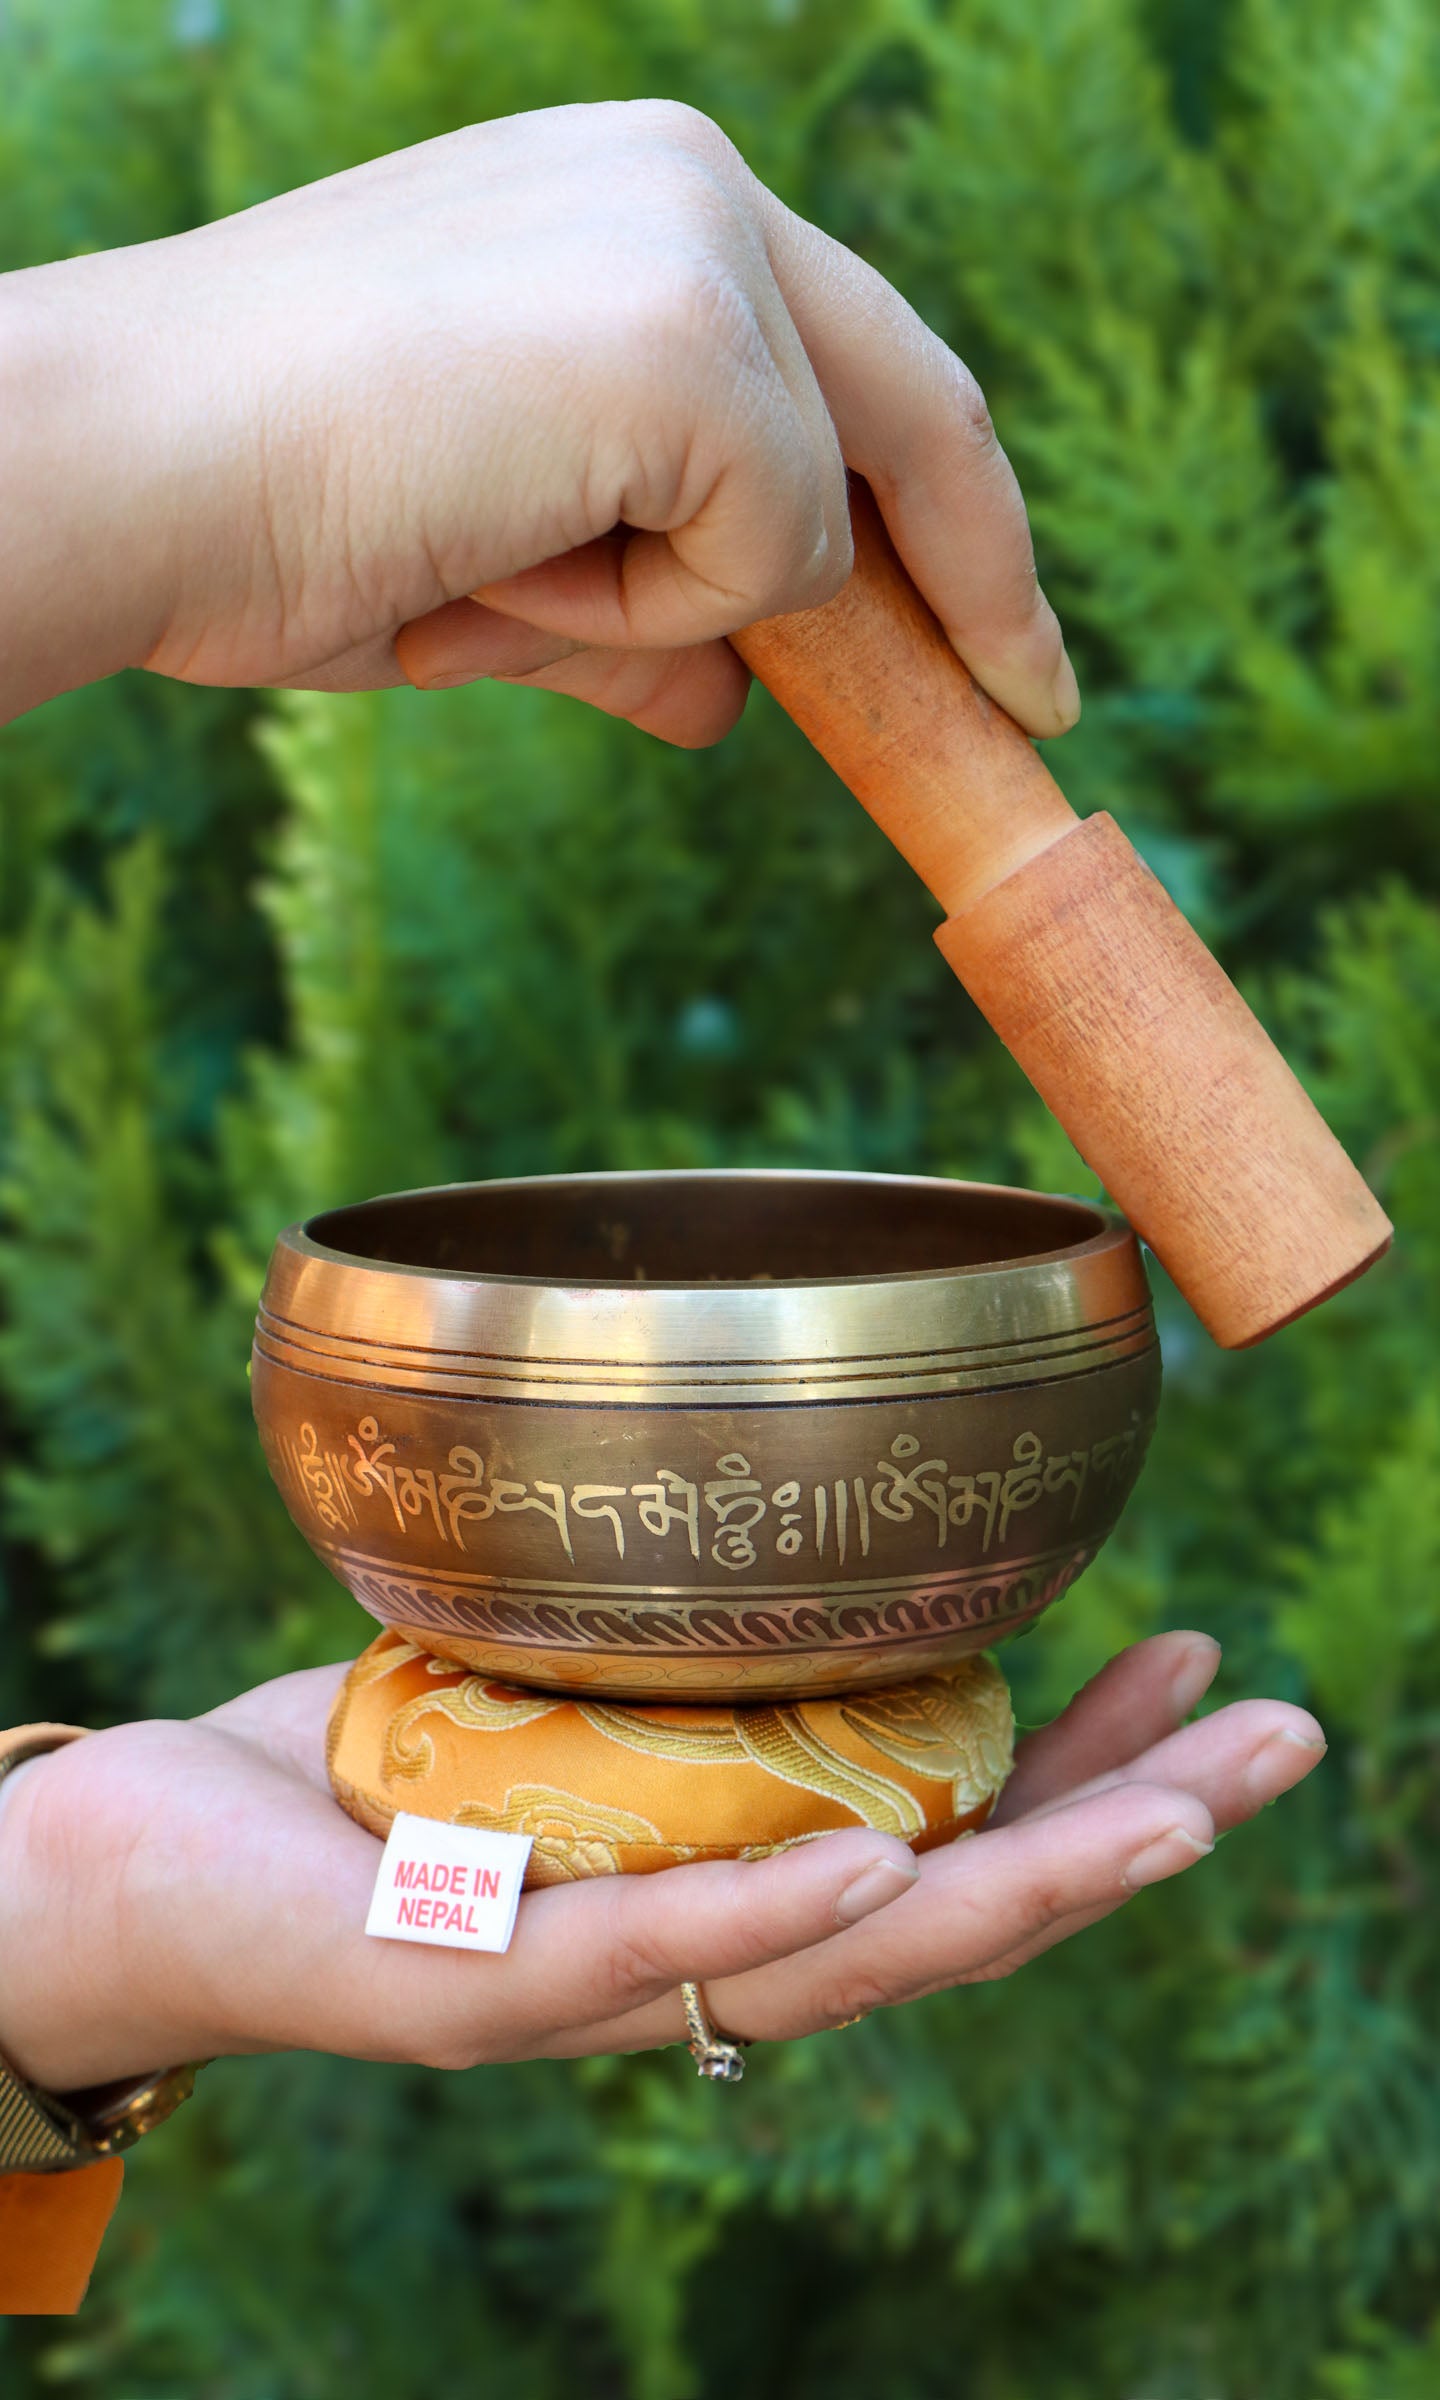 Buddha Singing Bowl small size for meditation and sound healing.